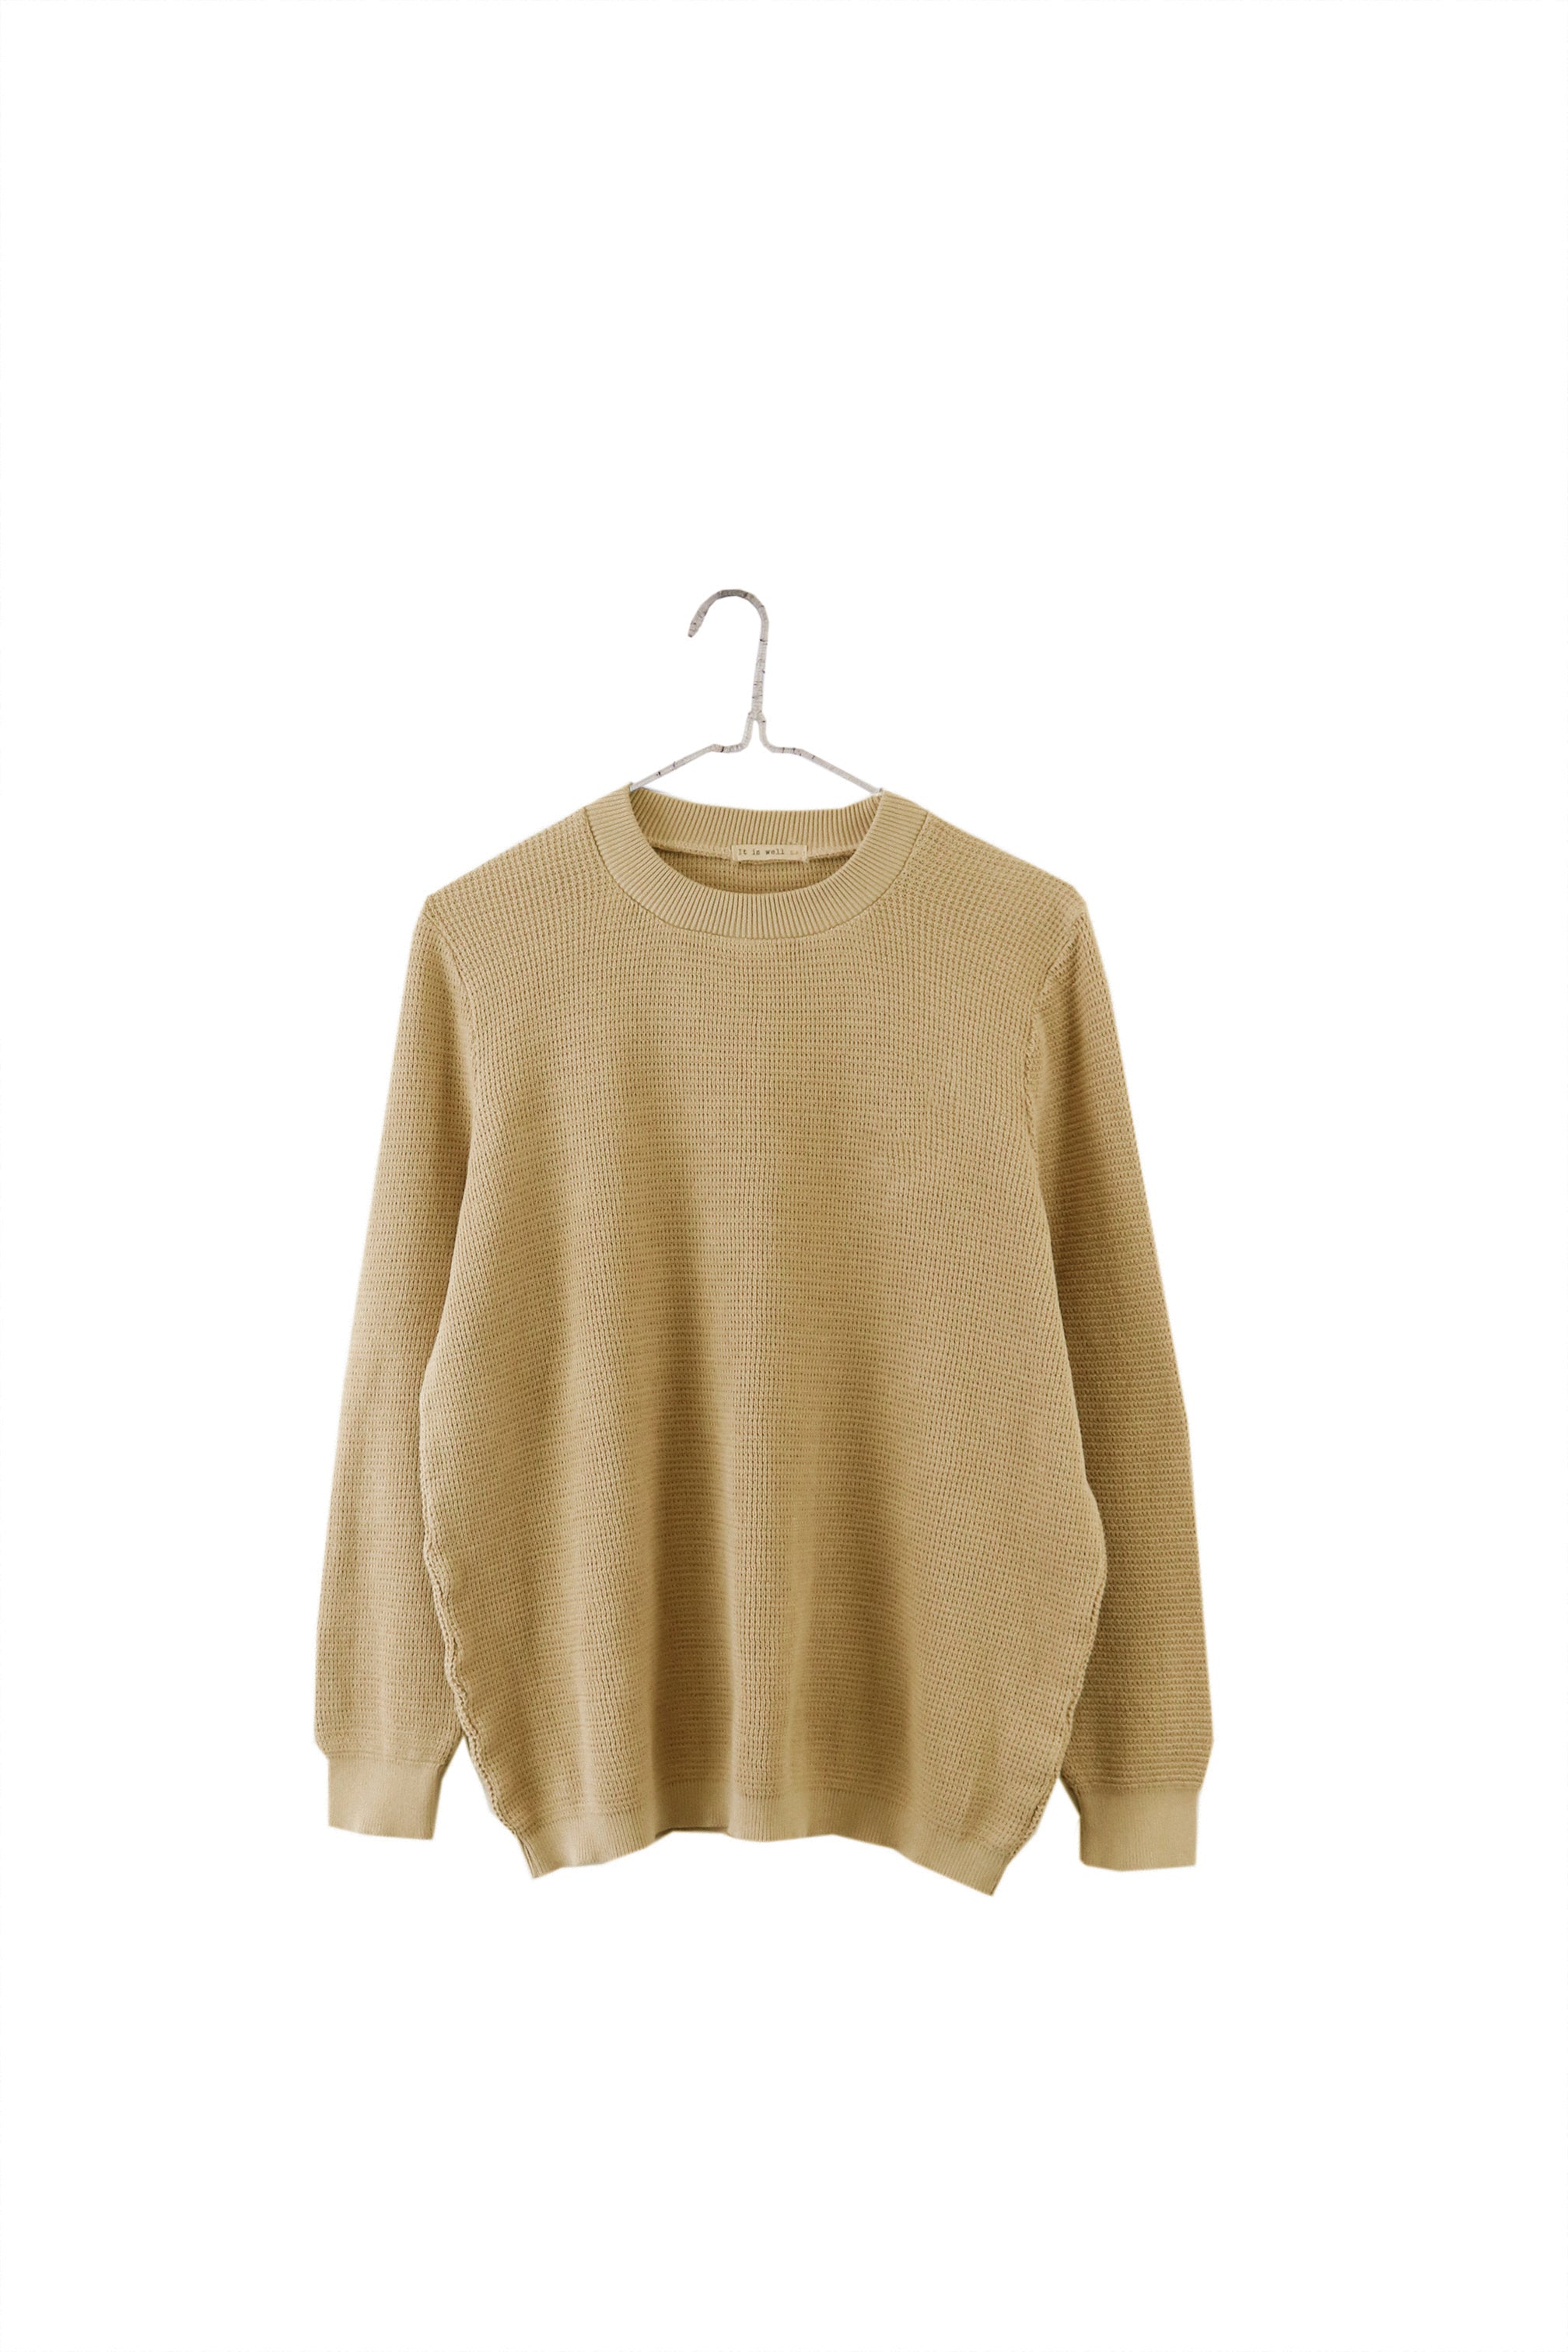 Easy Waffle Crewneck Sweater– It is well L.A.